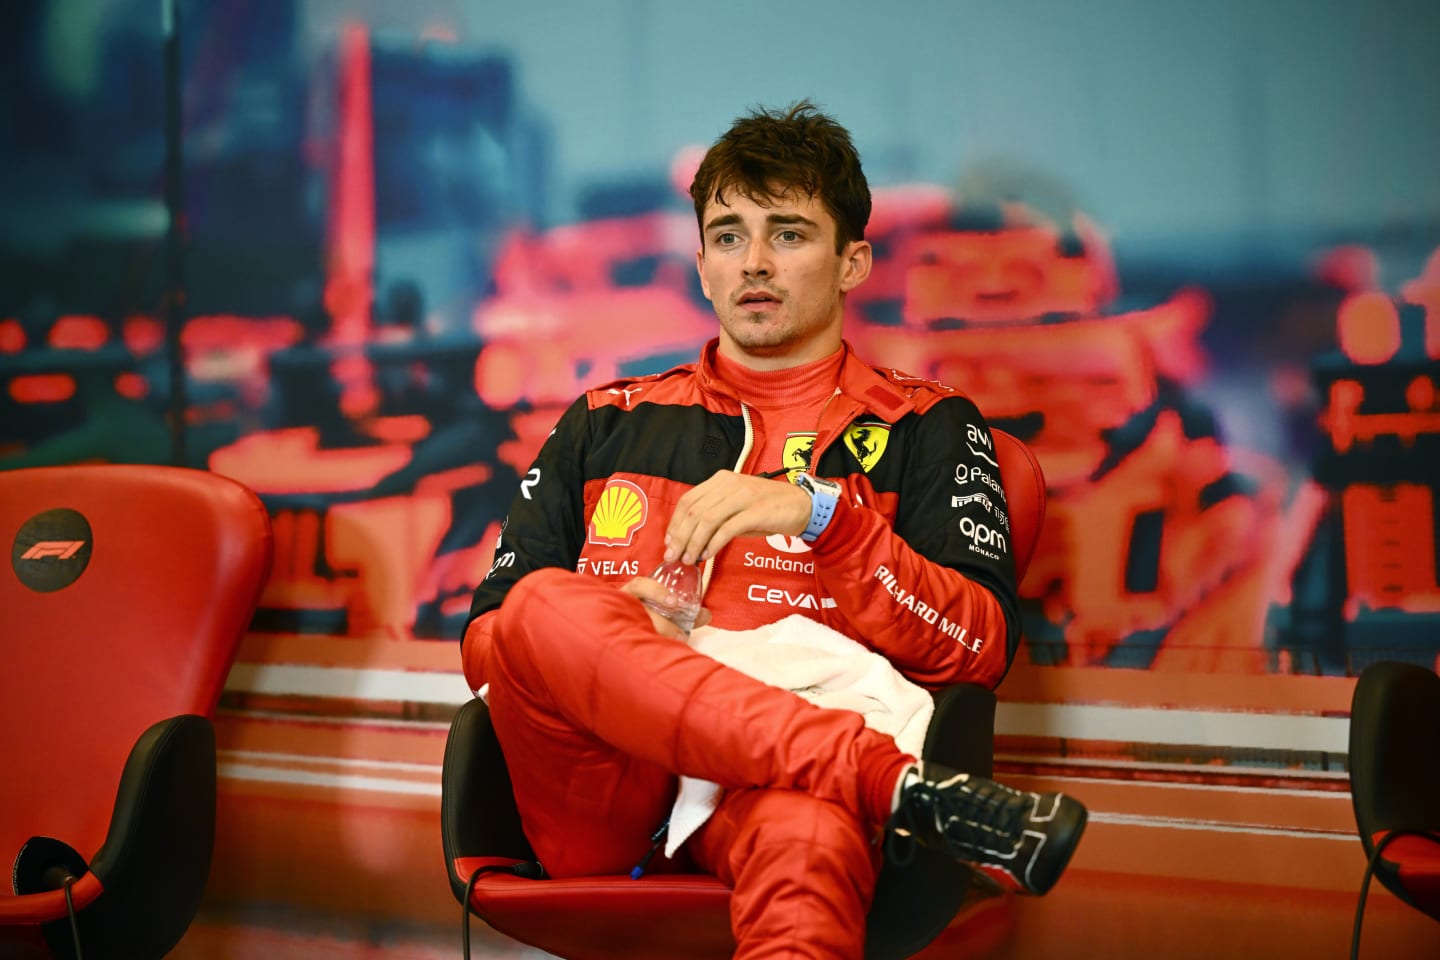 MONTE-CARLO, MONACO - MAY 28: Pole position qualifier Charles Leclerc of Monaco and Ferrari looks on in the press conference after qualifying ahead of the F1 Grand Prix of Monaco at Circuit de Monaco on May 28, 2022 in Monte-Carlo, Monaco. (Photo by Clive Mason/Getty Images)